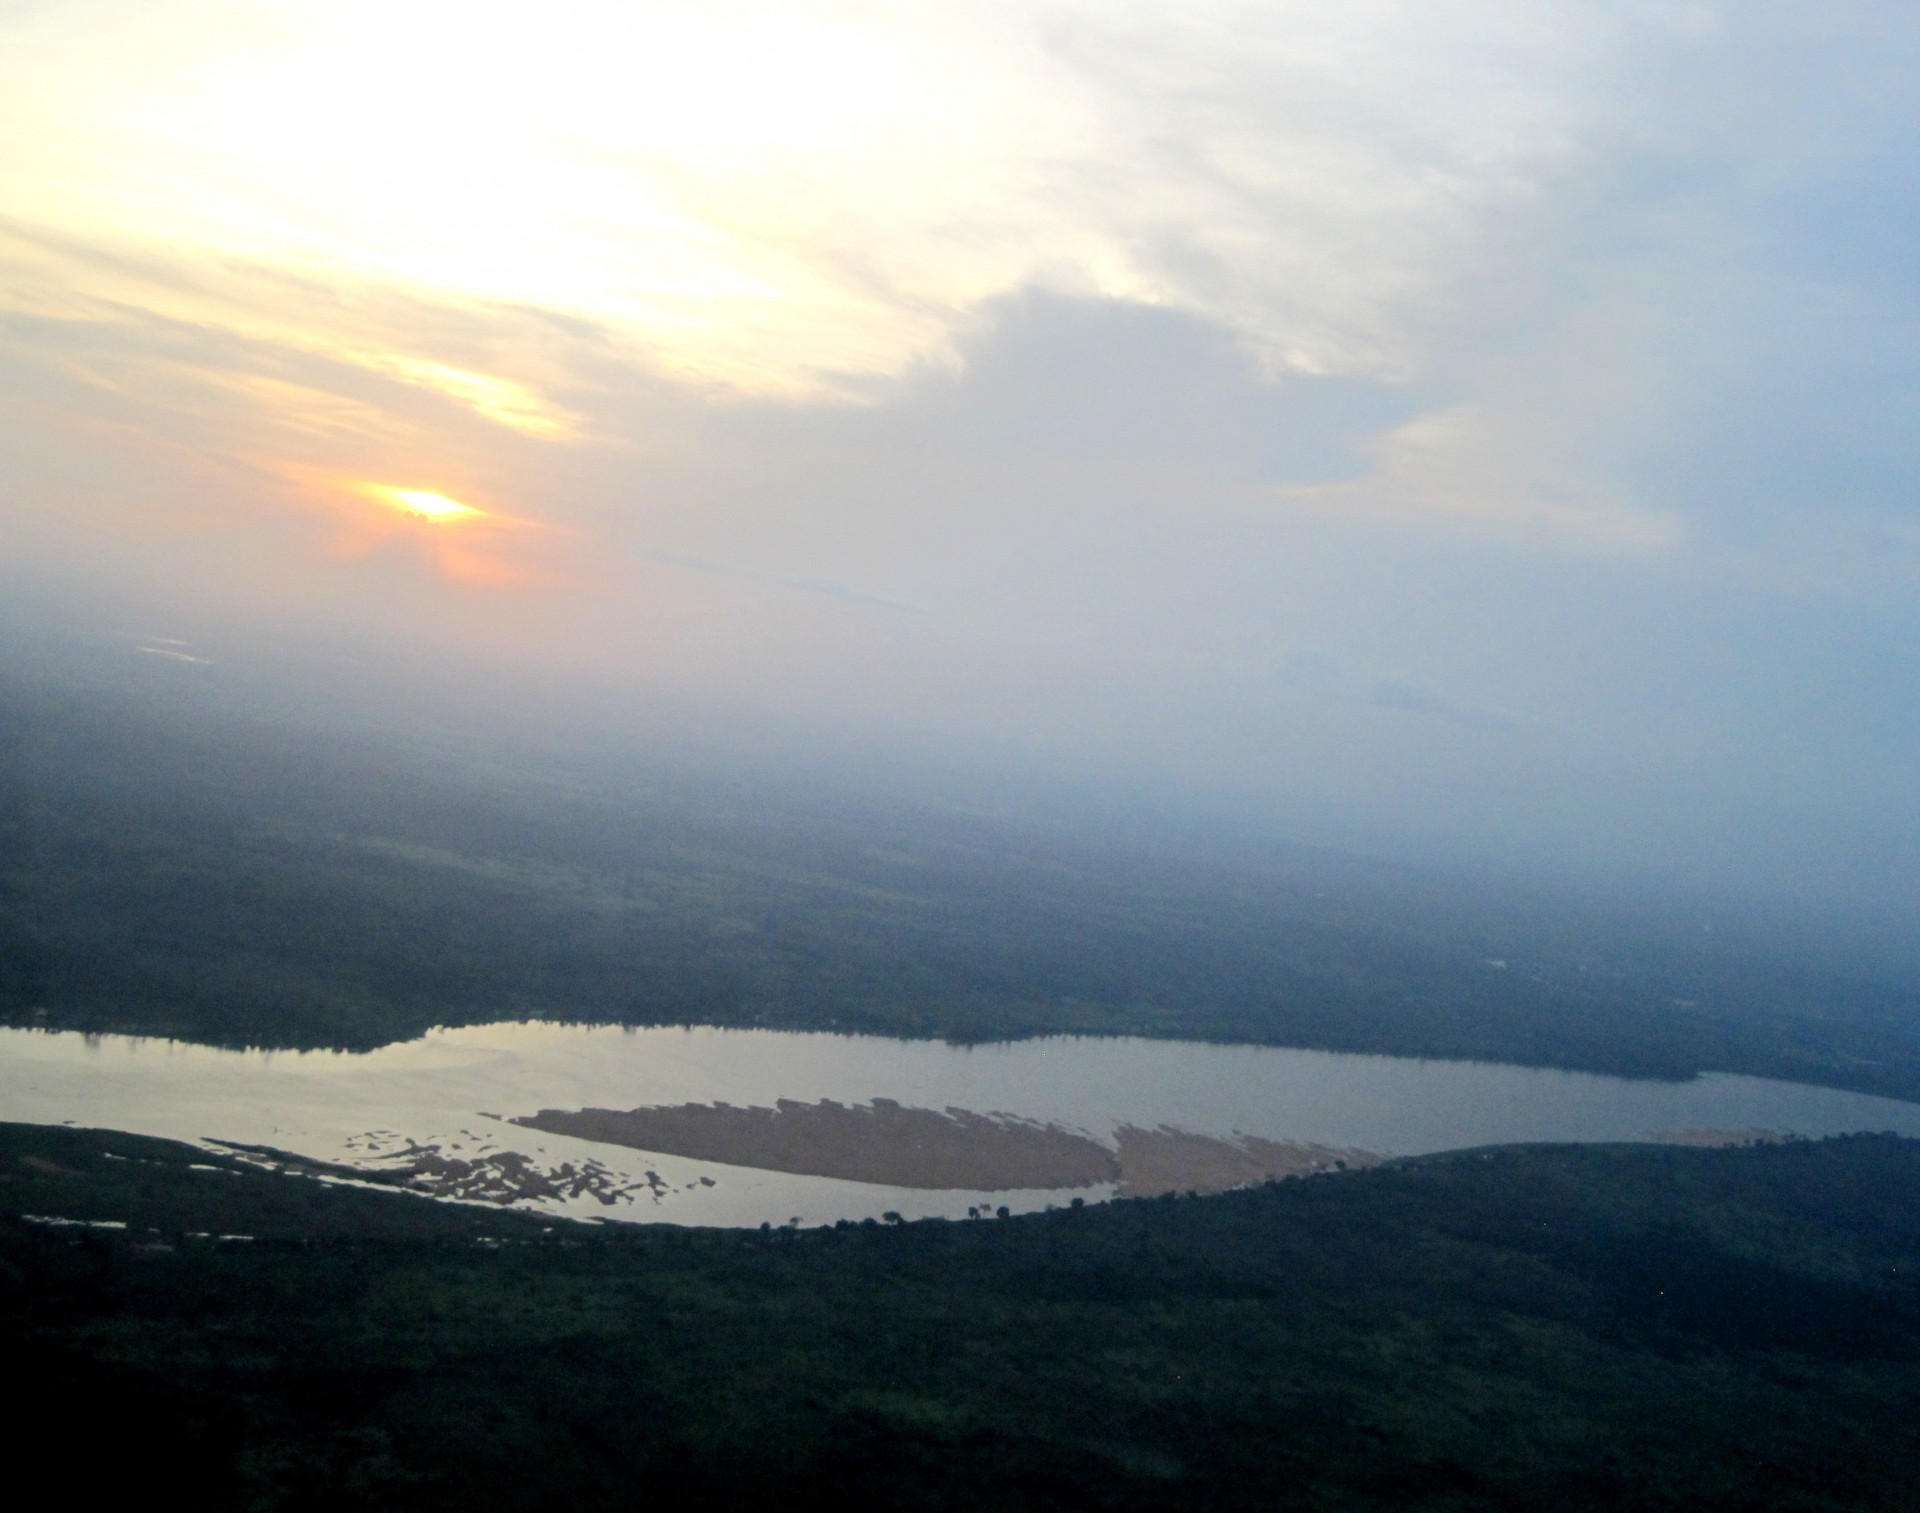 Late afternoon aerial view of Congo river, Africa.